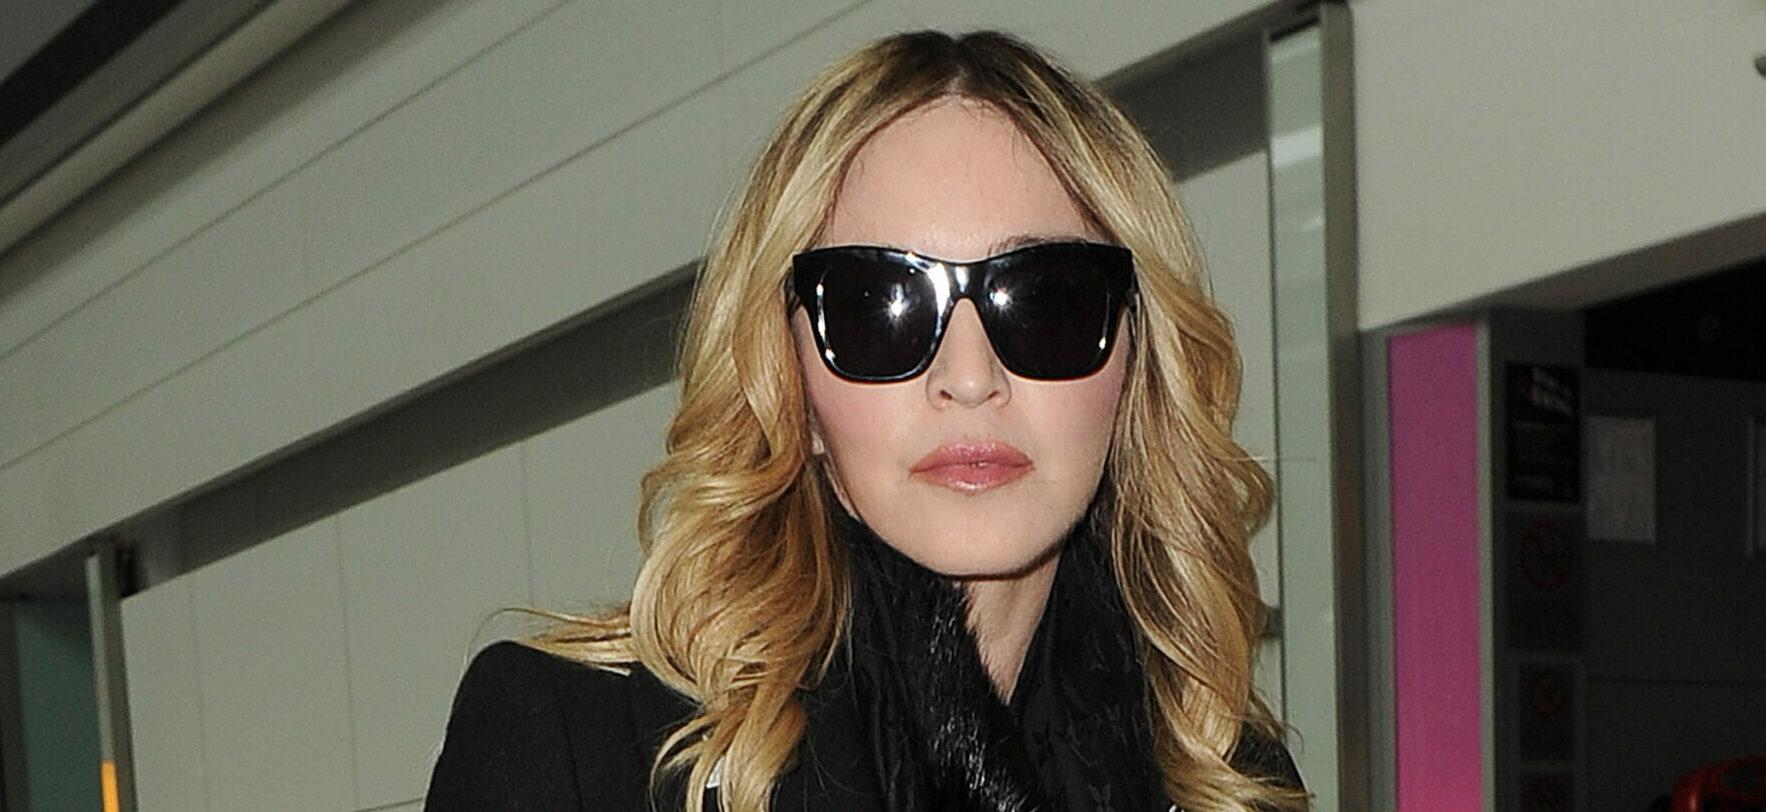 Madonna arriving at Heathrow Airport. She wore sunglasses and an all black outfit, with a fur coat, polkadot trousers and a black Gucci Ghost x Alessandro Michele tote handbag